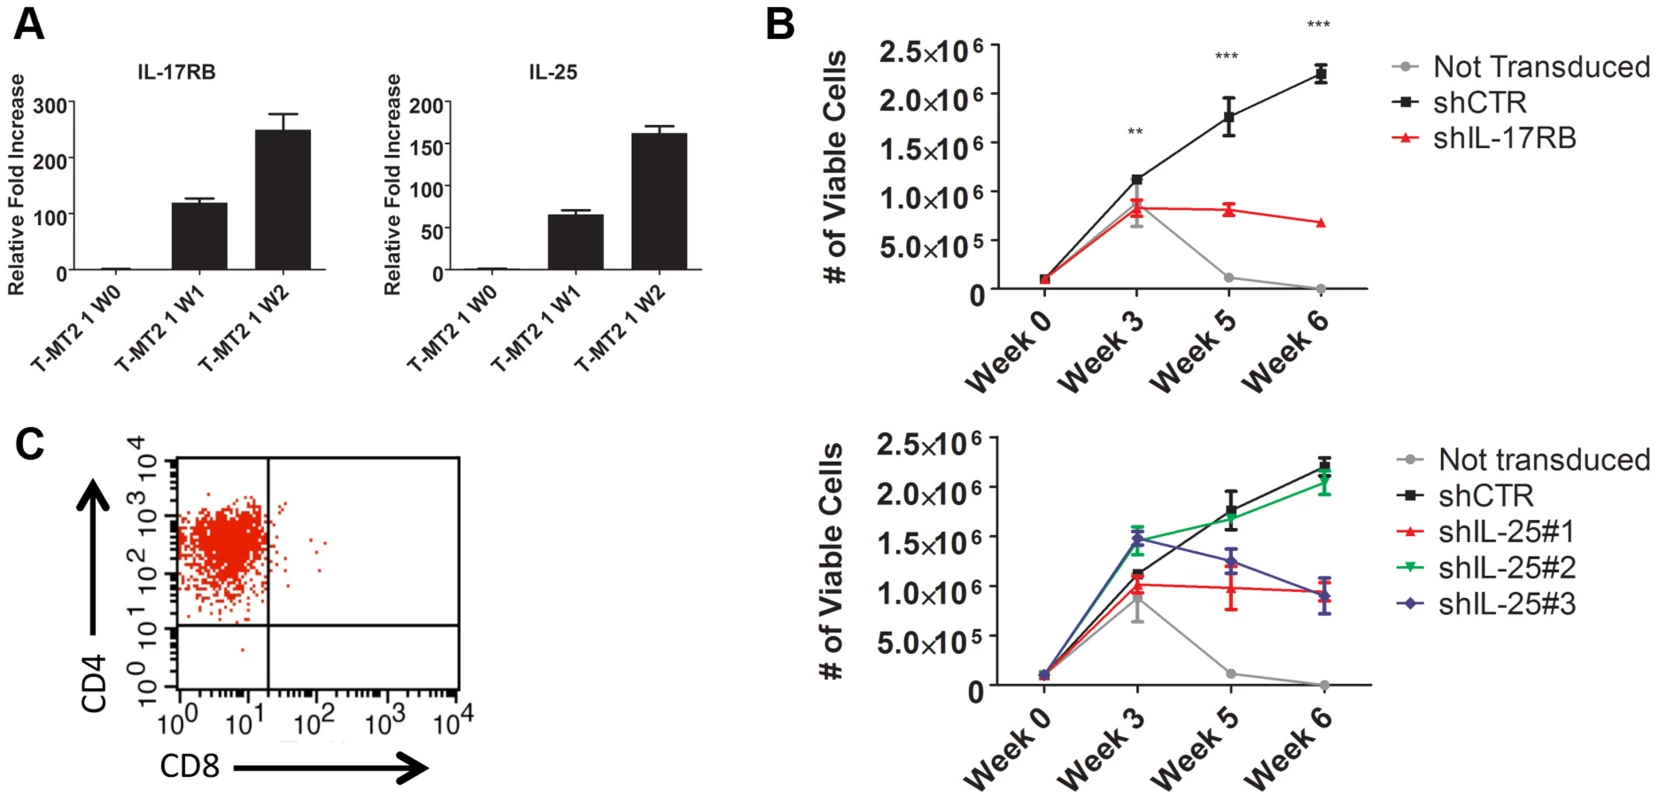 IL-17RB and IL-25 are essential for the HTLV-1-induced immortalization of T cells.